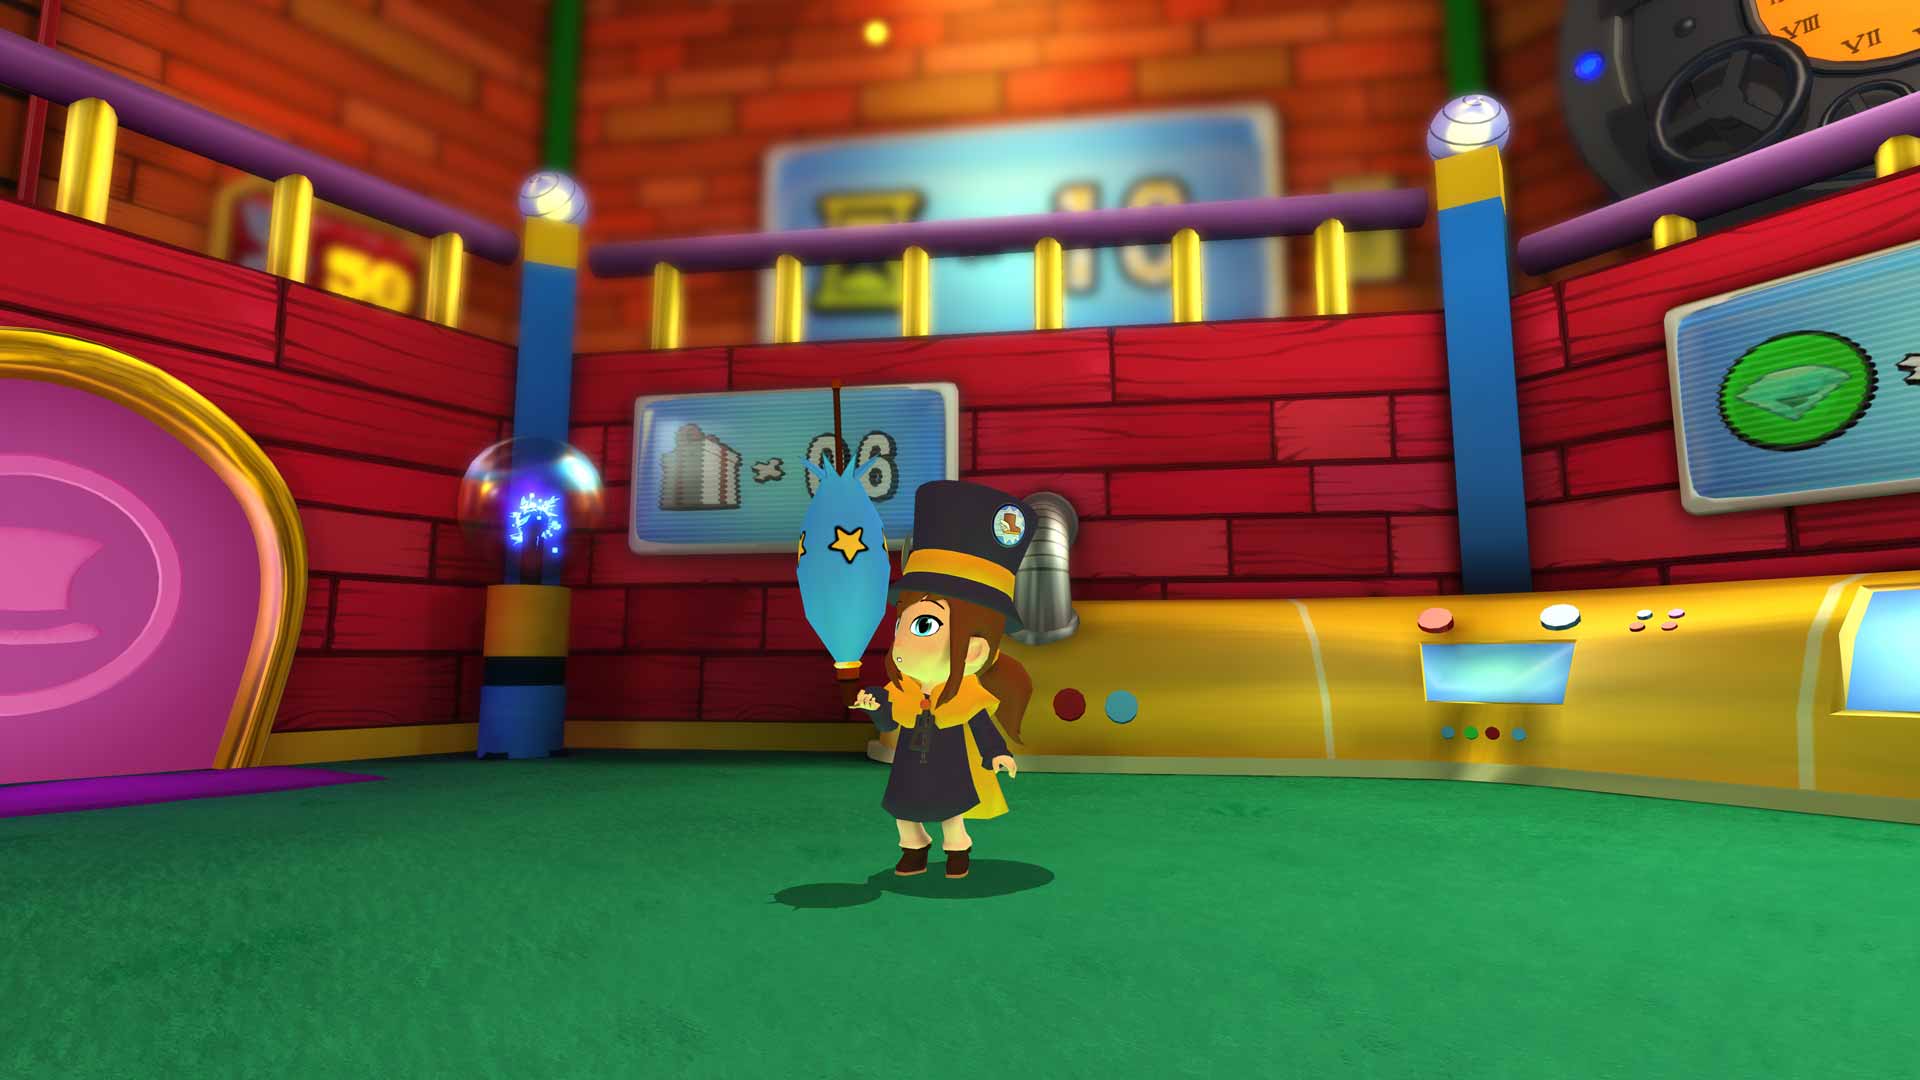 A Hat in Time Review